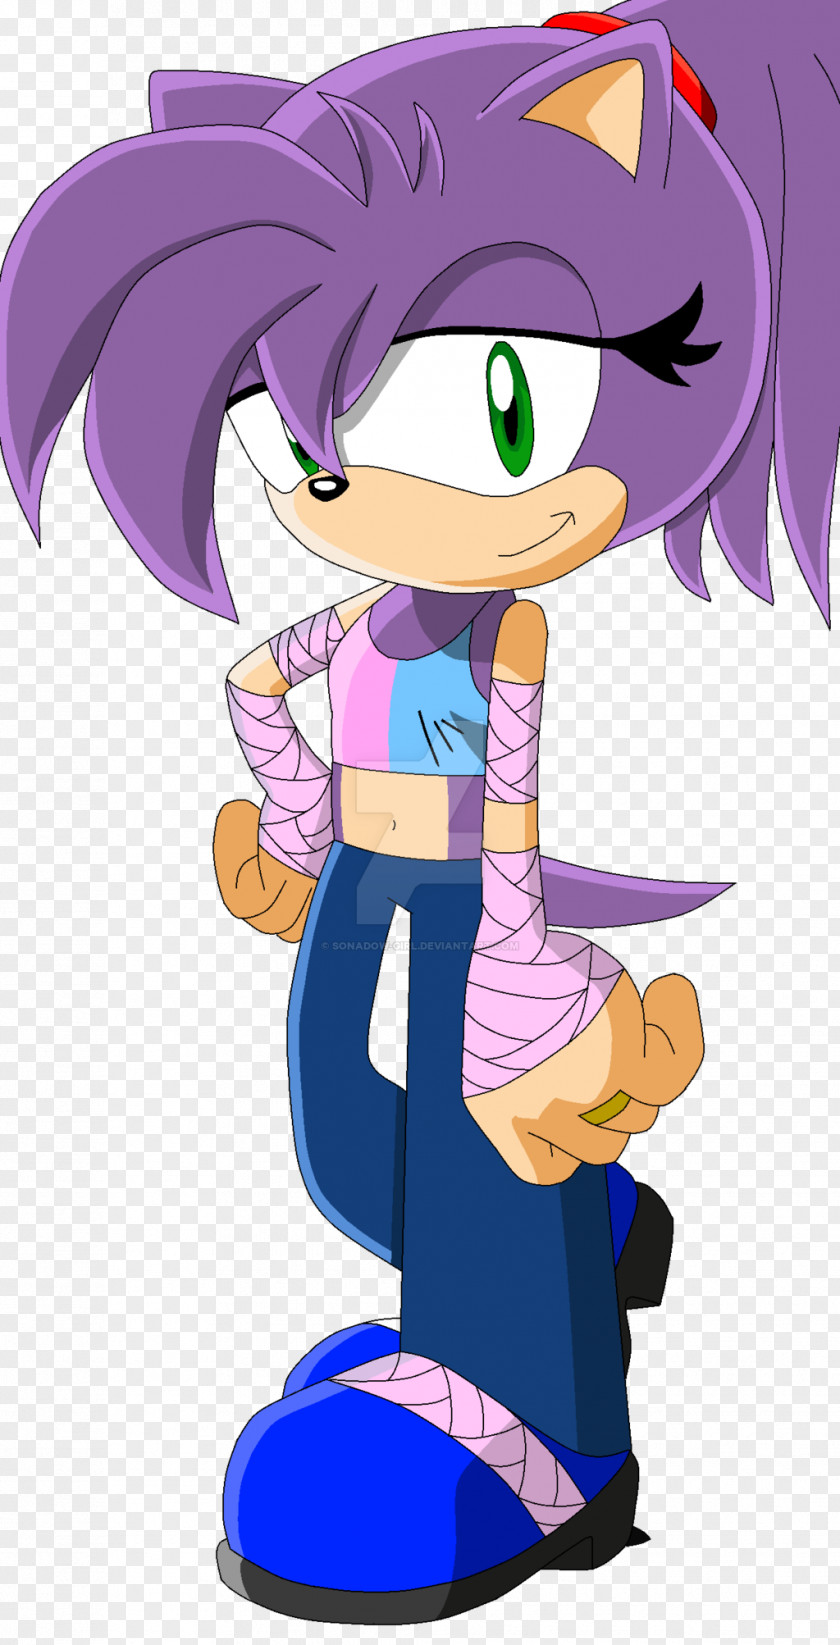 Sonic The Hedgehog Fiction PNG